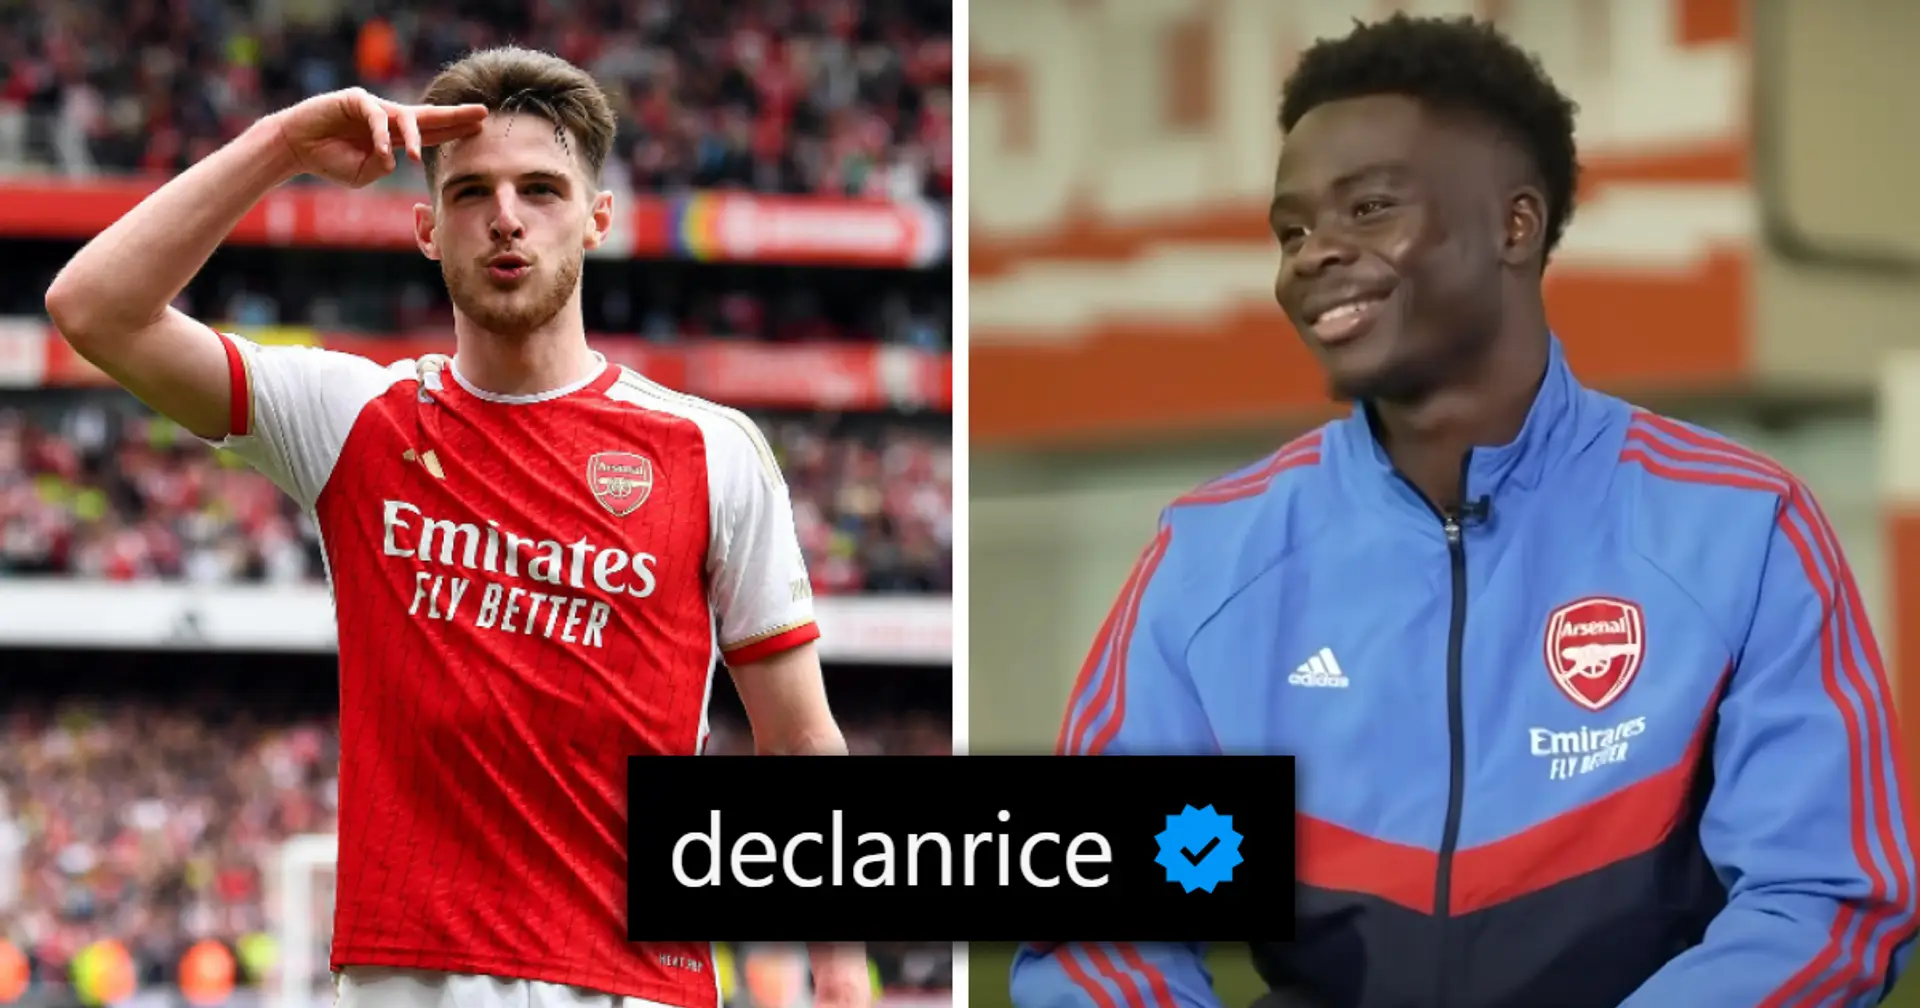 Bukayo Saka jumps to Declan Rice's comments section to mock Man City 